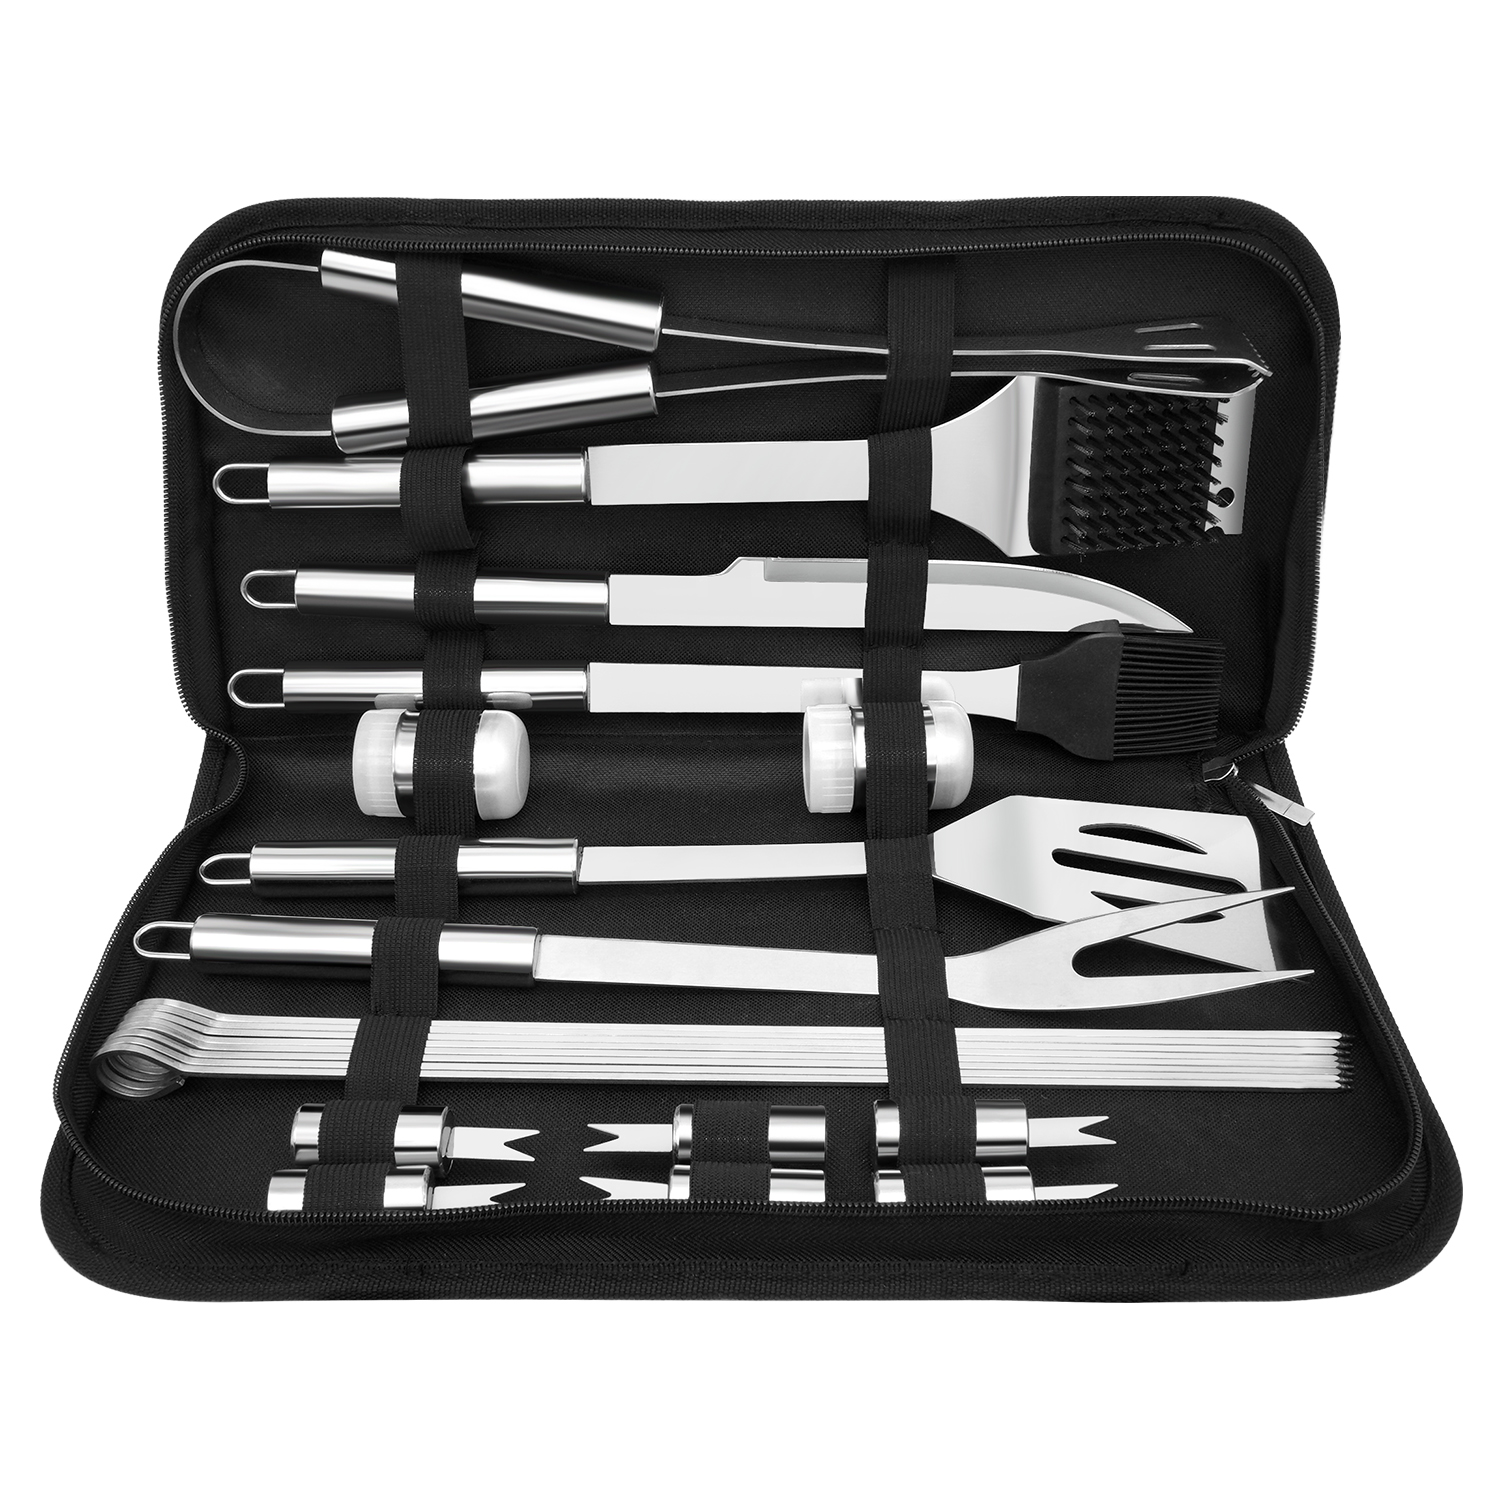 JOW BBQ Grill Accessories Set with Case, 26pc Stainless Steel Heavy Duty Barbecue Grilling Tool Utensils Kit with Tong, Grill Cleaning Brush, Spatula, Fork, Basting Brush - image 2 of 12